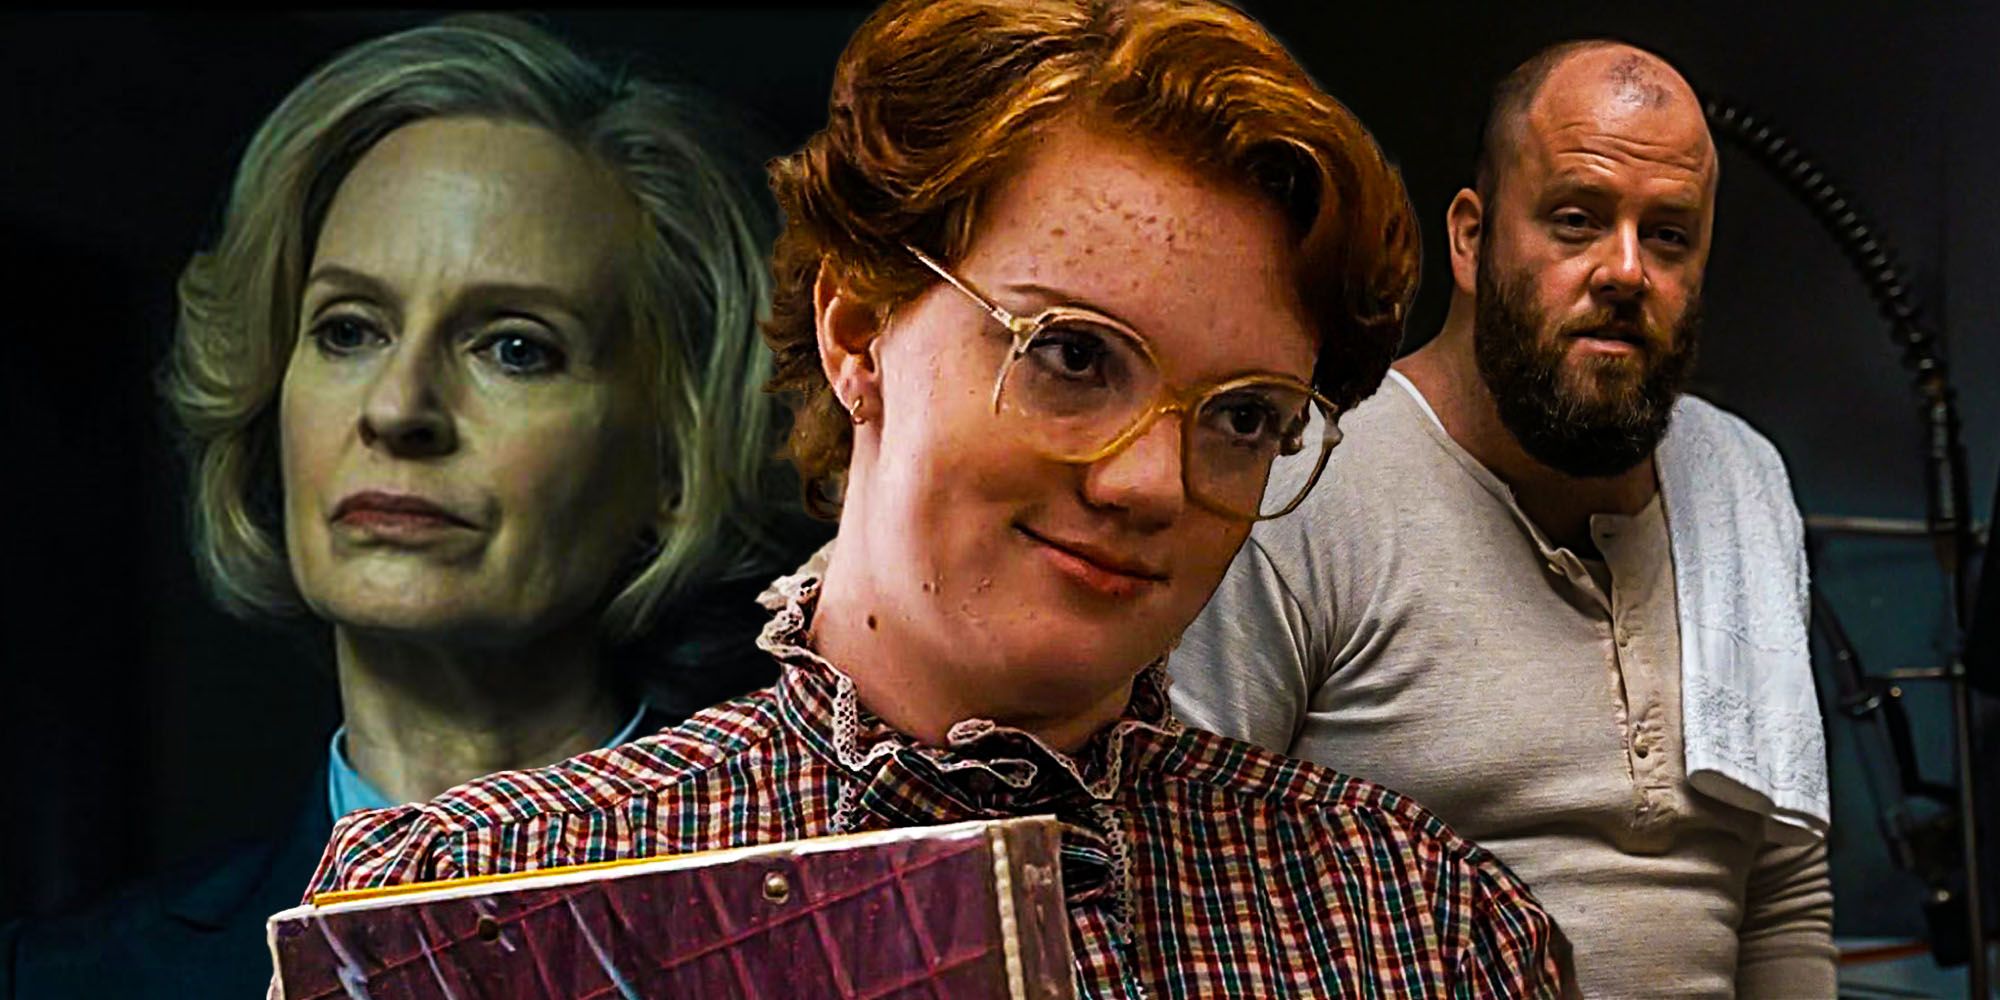 Barb from 'Stranger Things' is a throwaway character with a purpose